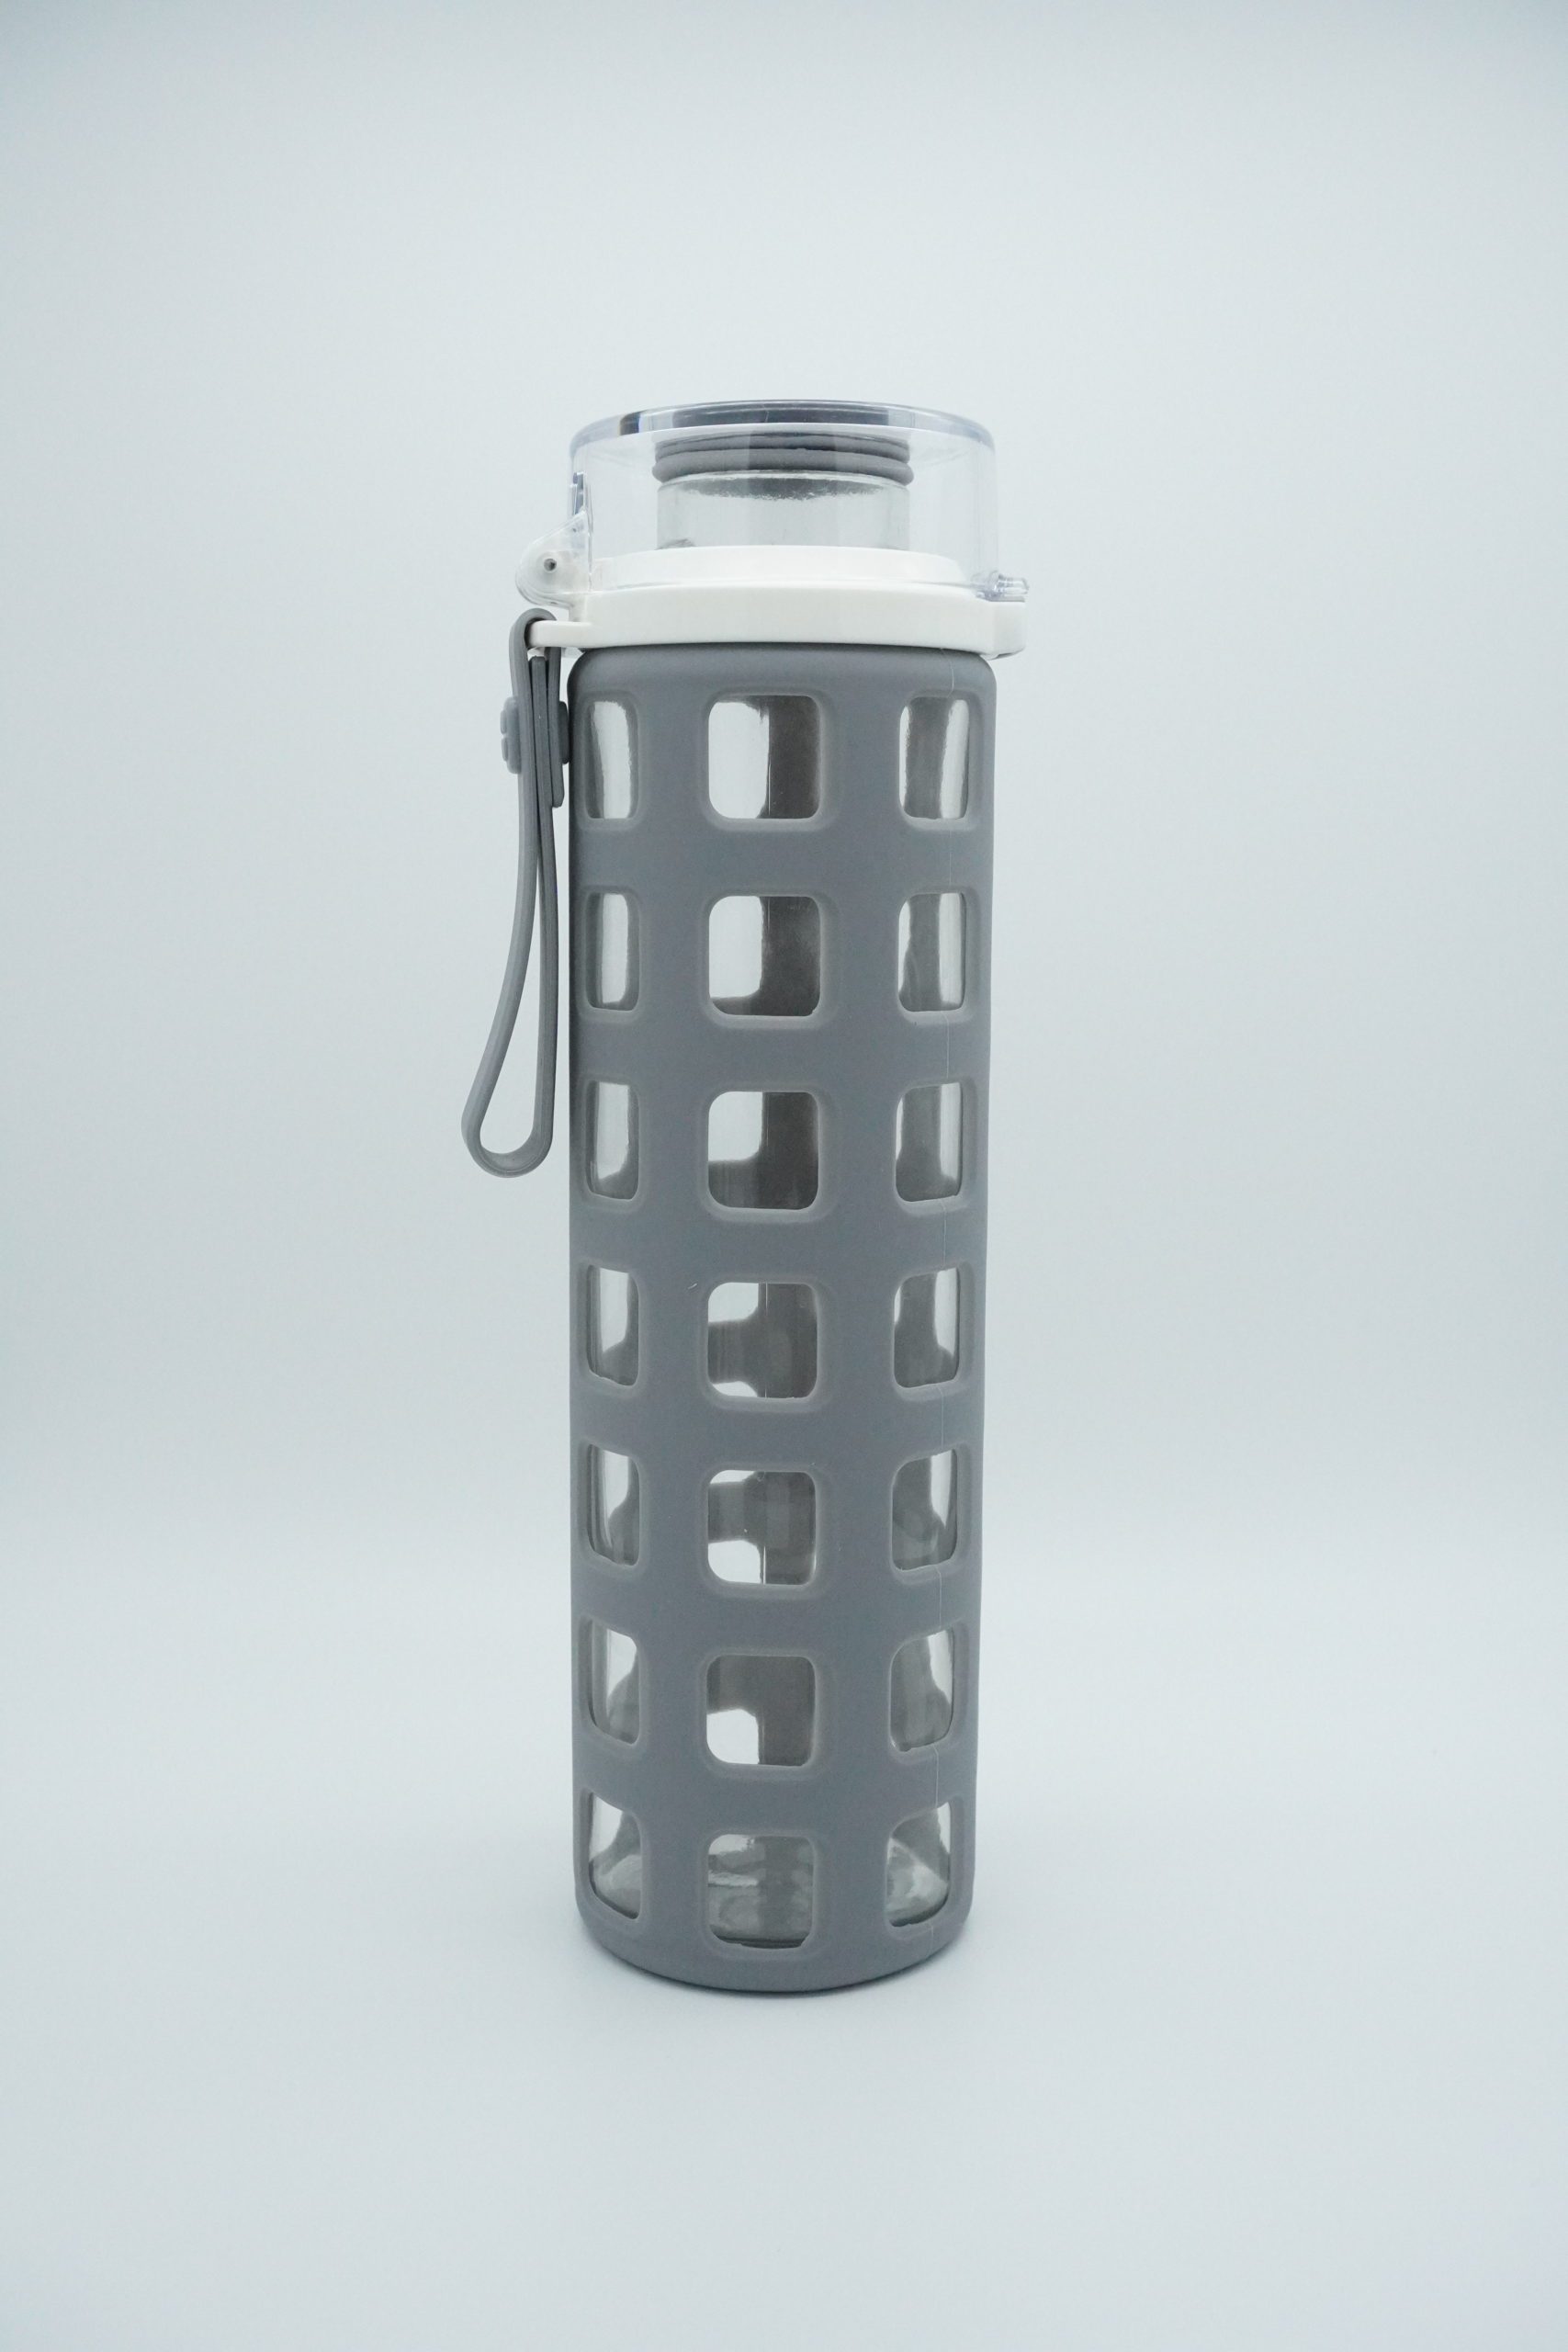 Ello Syndicate Glass Water Bottle - Replacement Lid